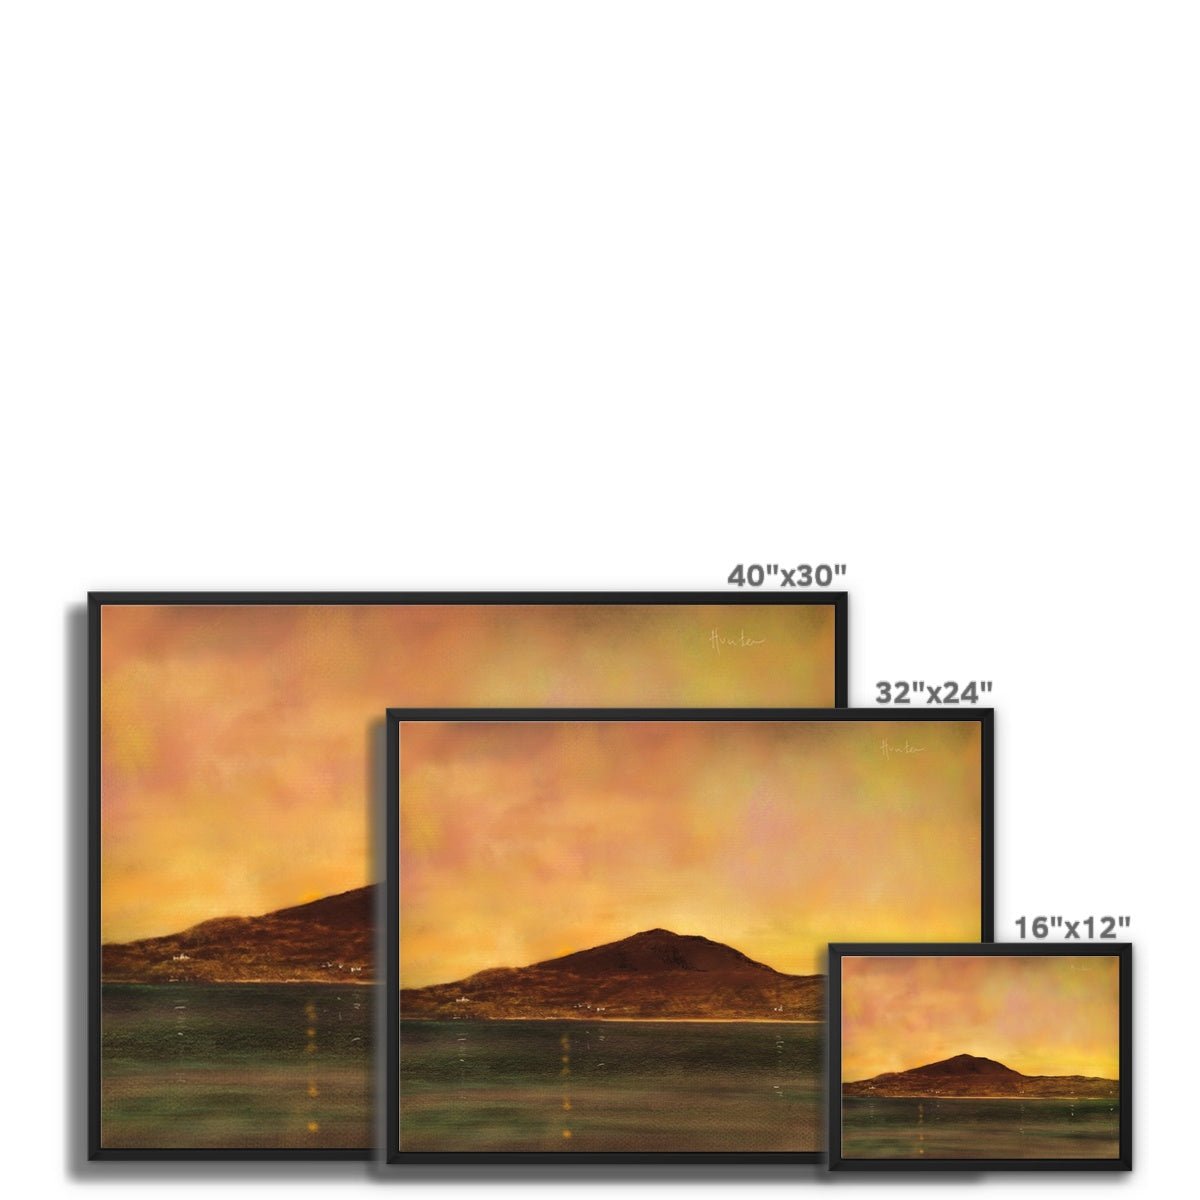 Eriskay Dusk Painting | Framed Canvas From Scotland-Floating Framed Canvas Prints-Hebridean Islands Art Gallery-Paintings, Prints, Homeware, Art Gifts From Scotland By Scottish Artist Kevin Hunter